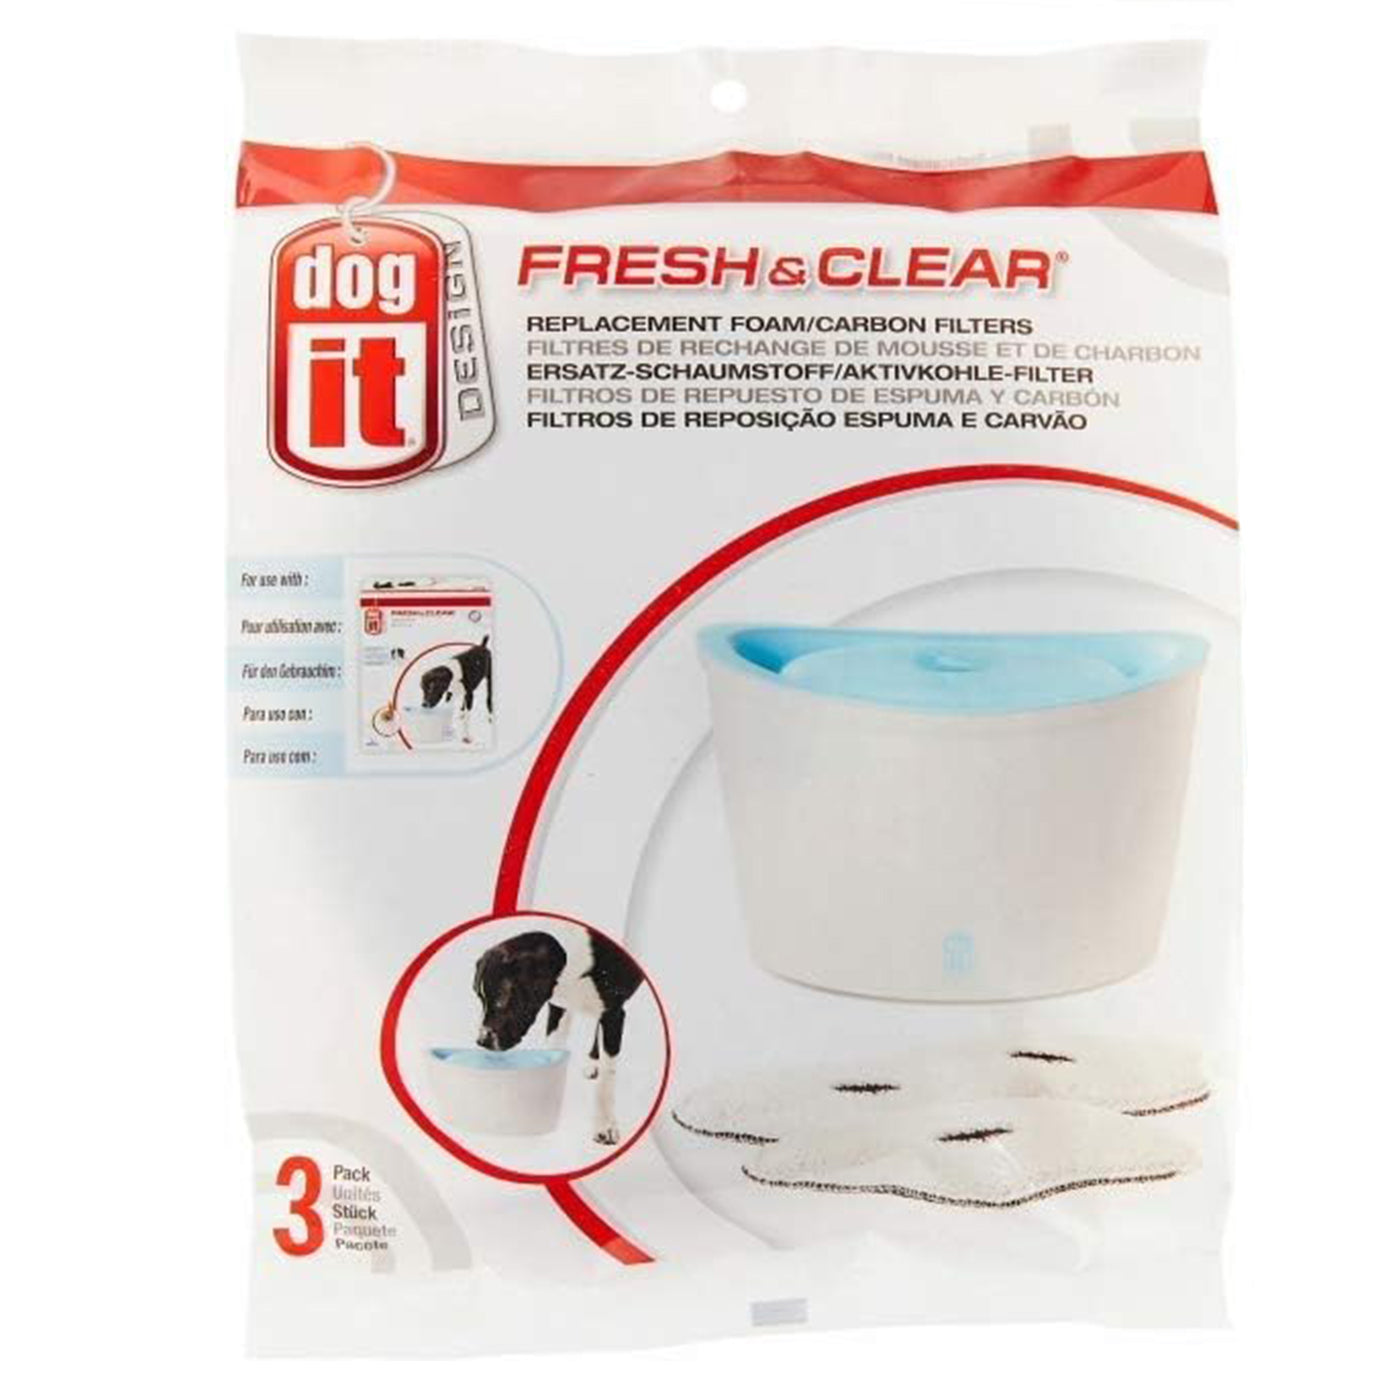 Dogit Fresh & Clear Foam/Carbon Filters (3 Pack)